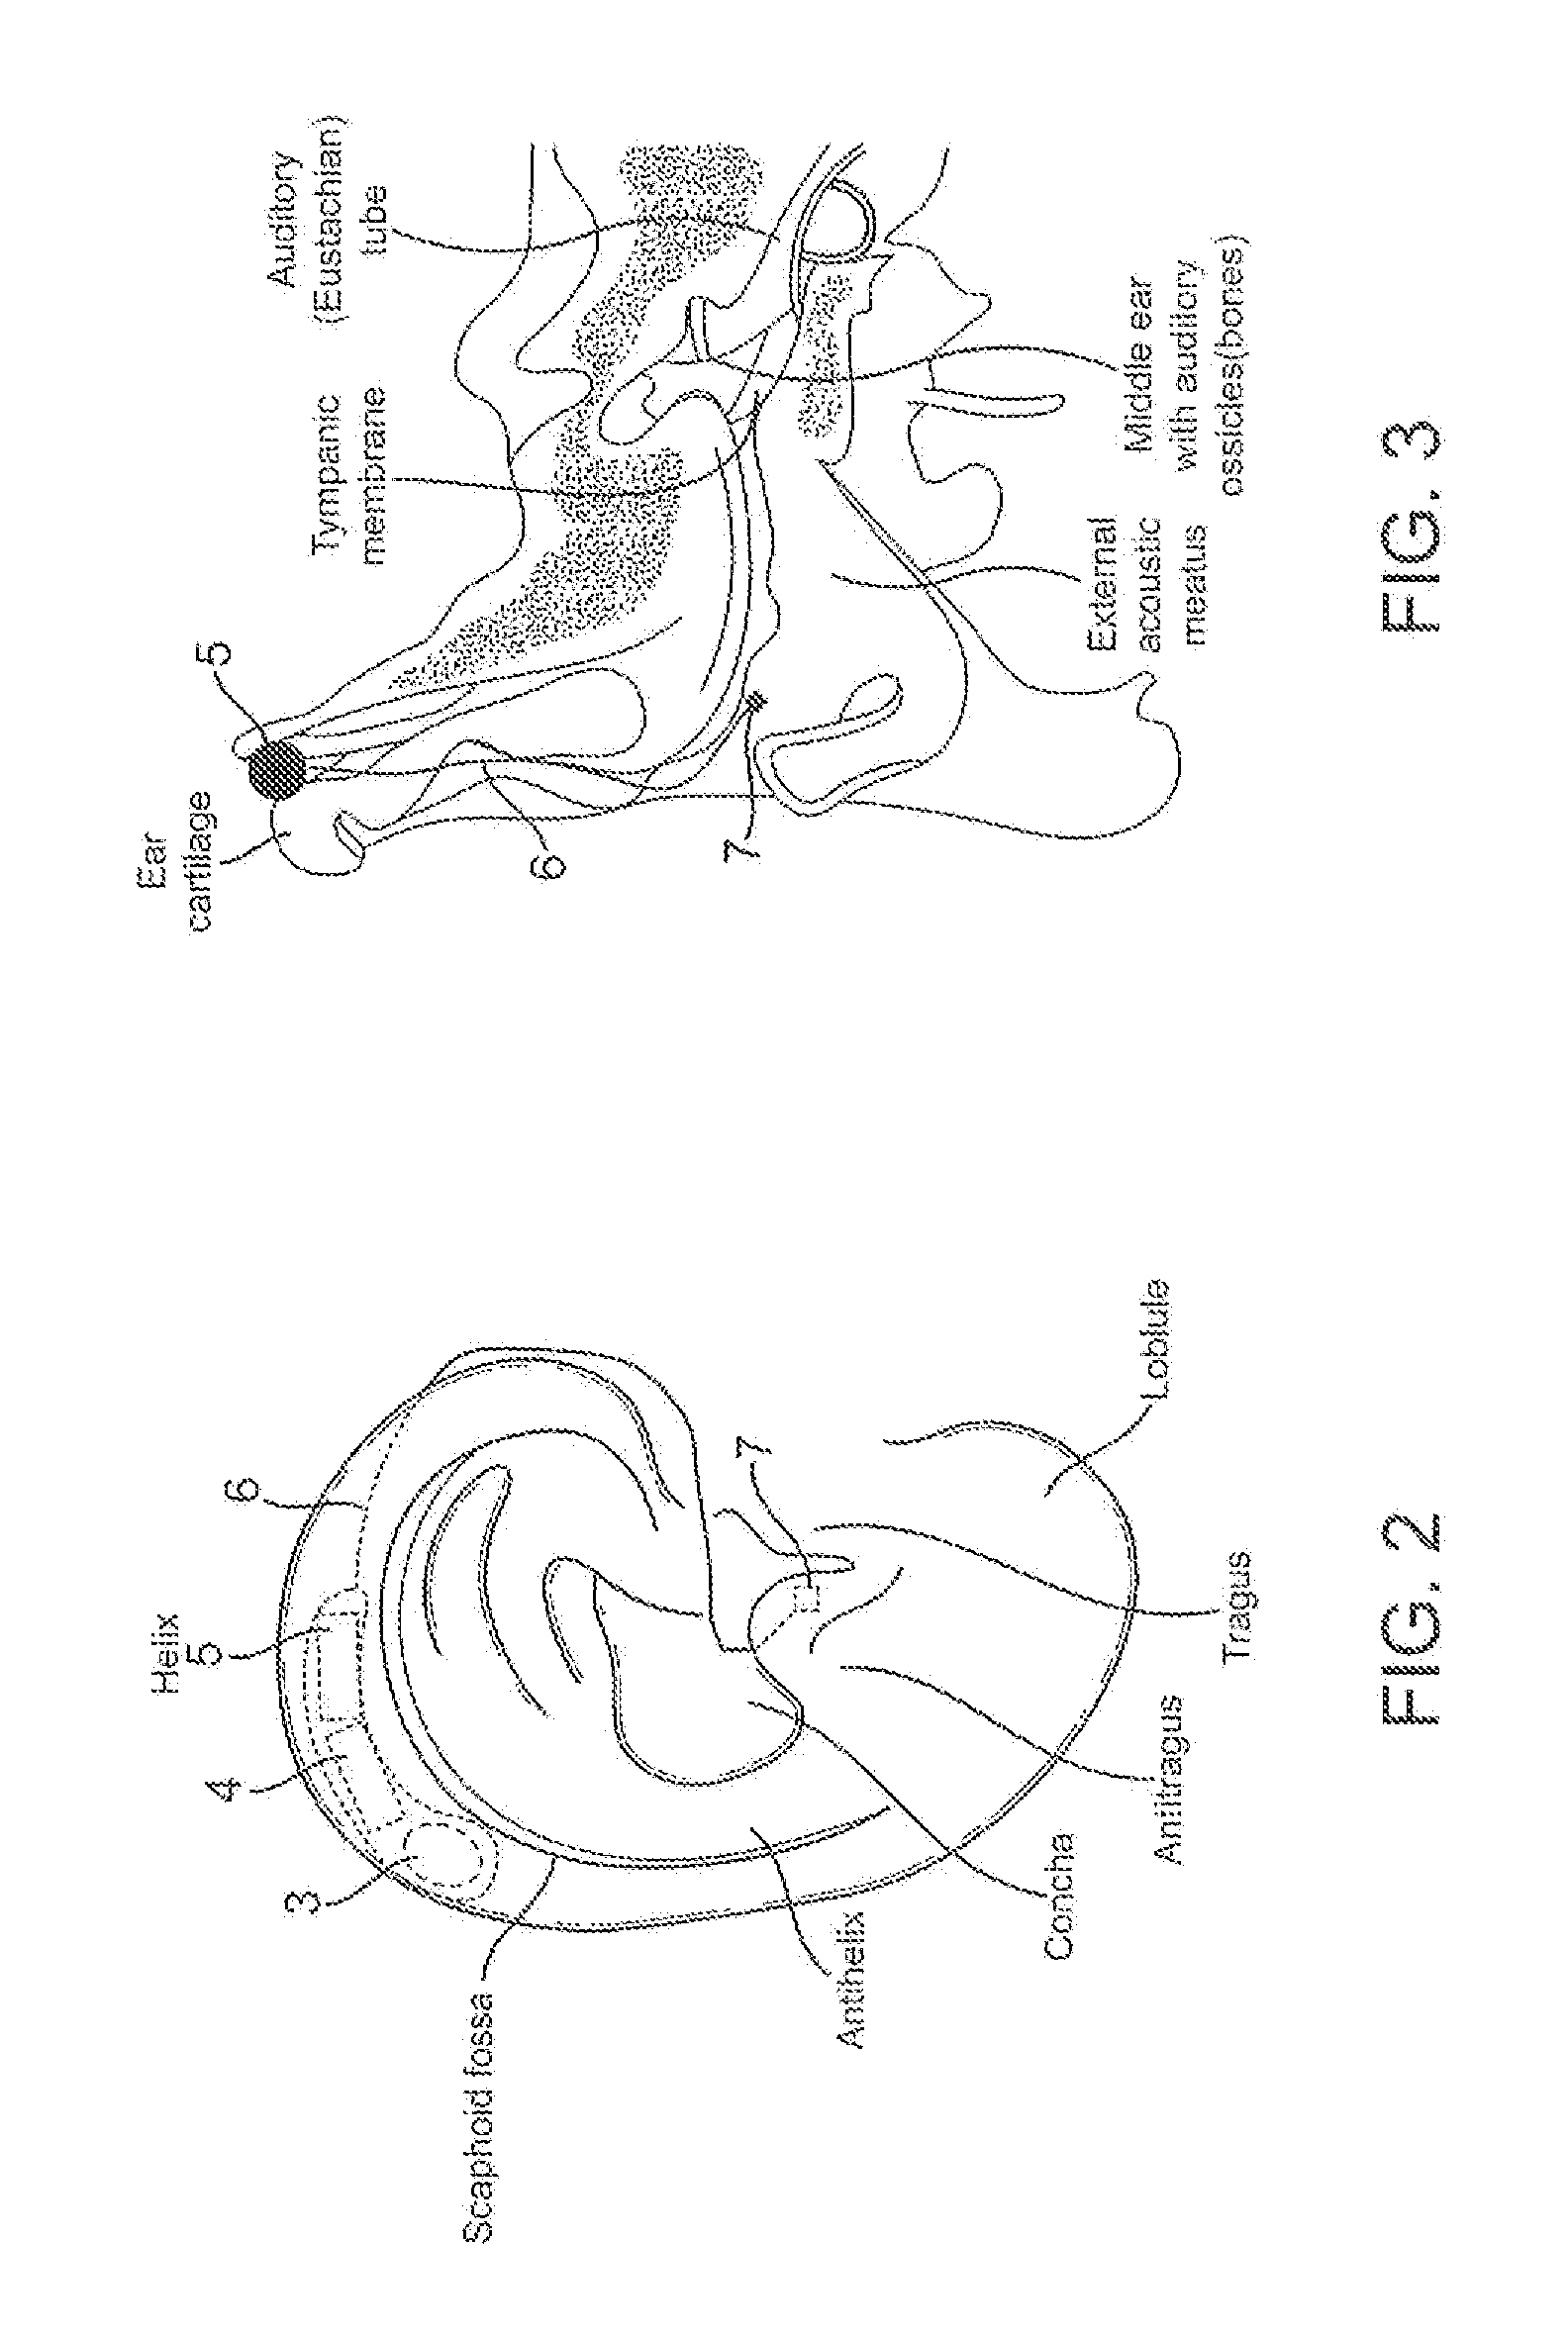 Bone conduction hearing device with open-ear microphone